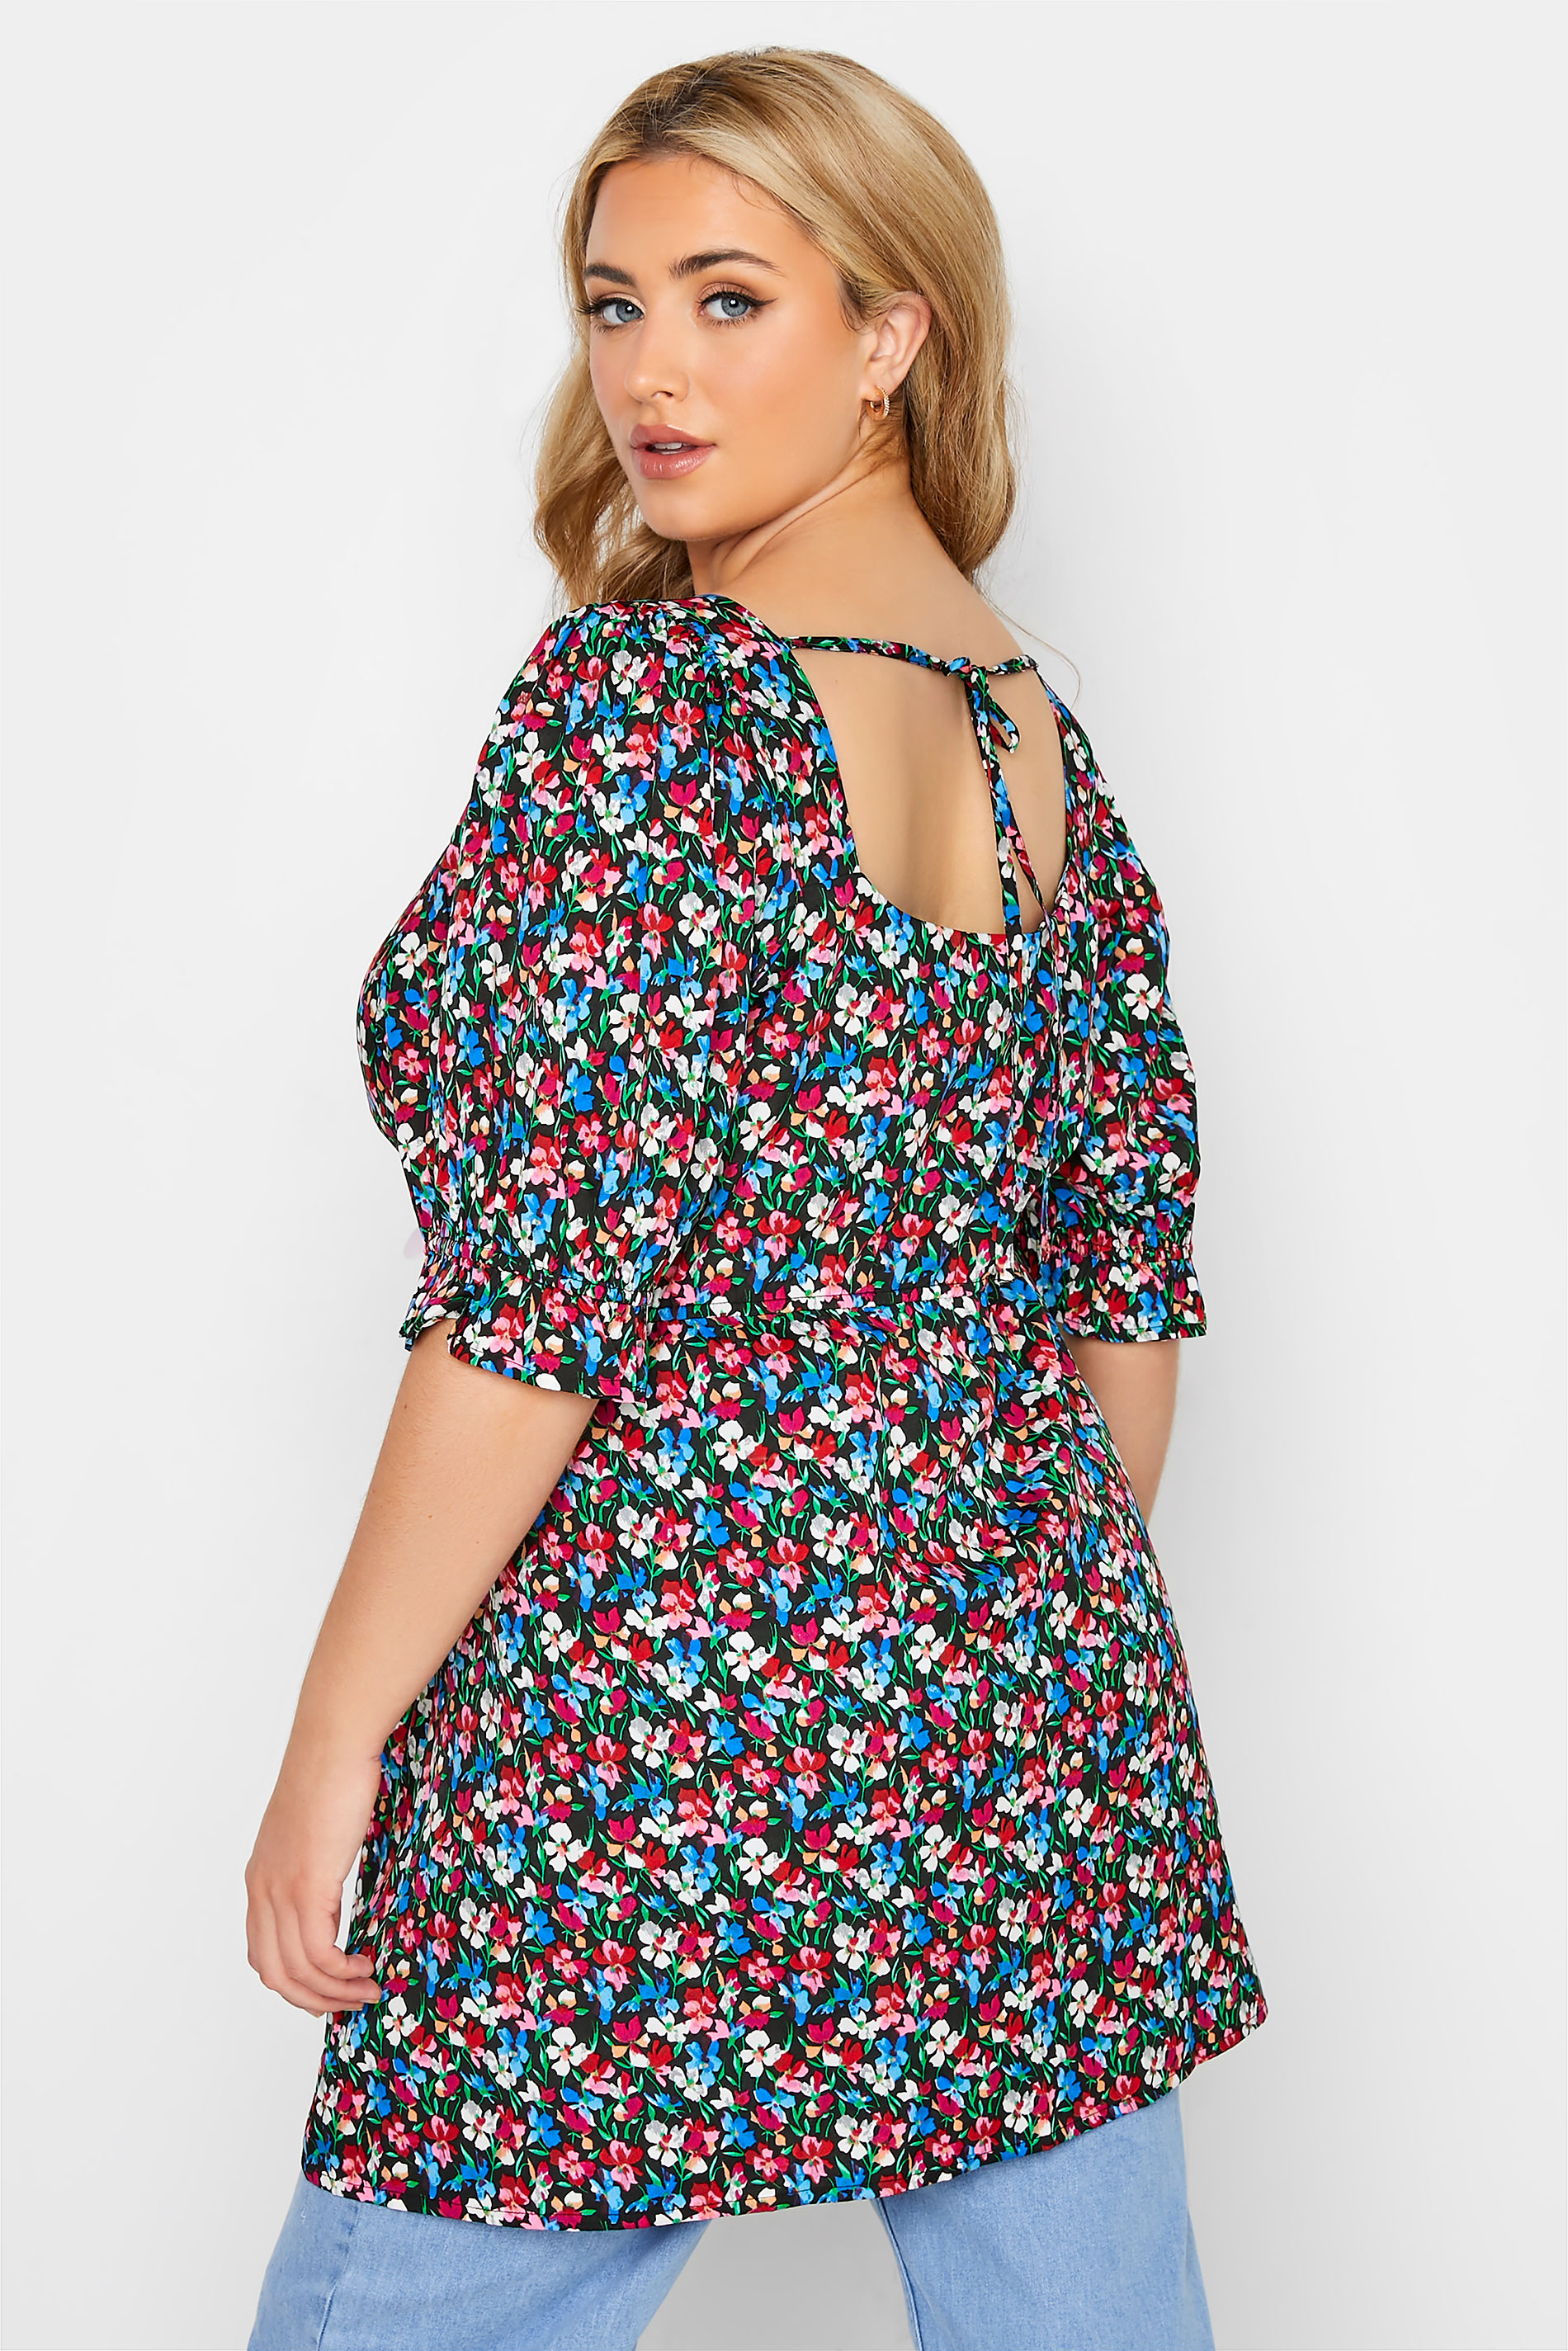 LIMITED COLLECTION Plus Size Black Floral Print Puff Sleeve Peplum Top | Yours Clothing 3